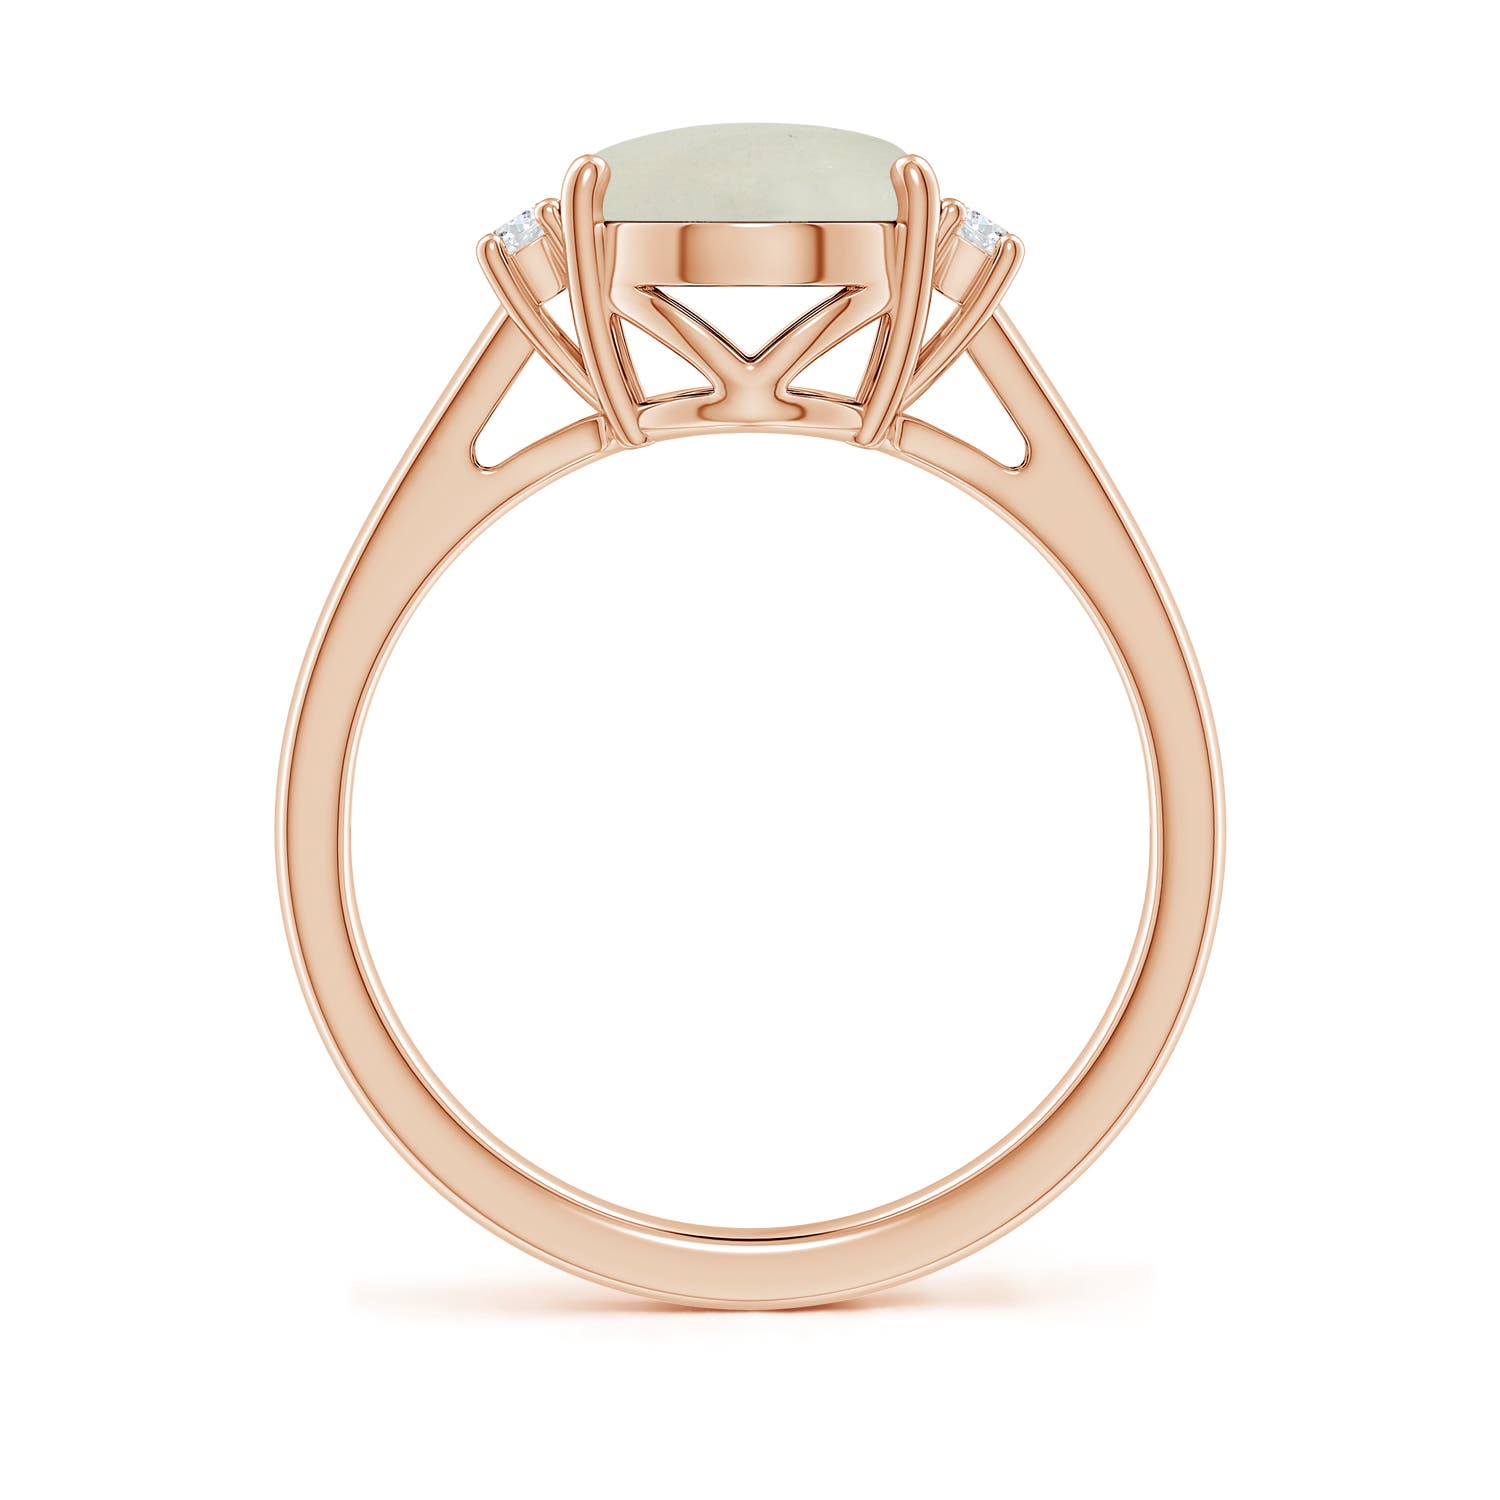 AA - Moonstone / 2.66 CT / 14 KT Rose Gold